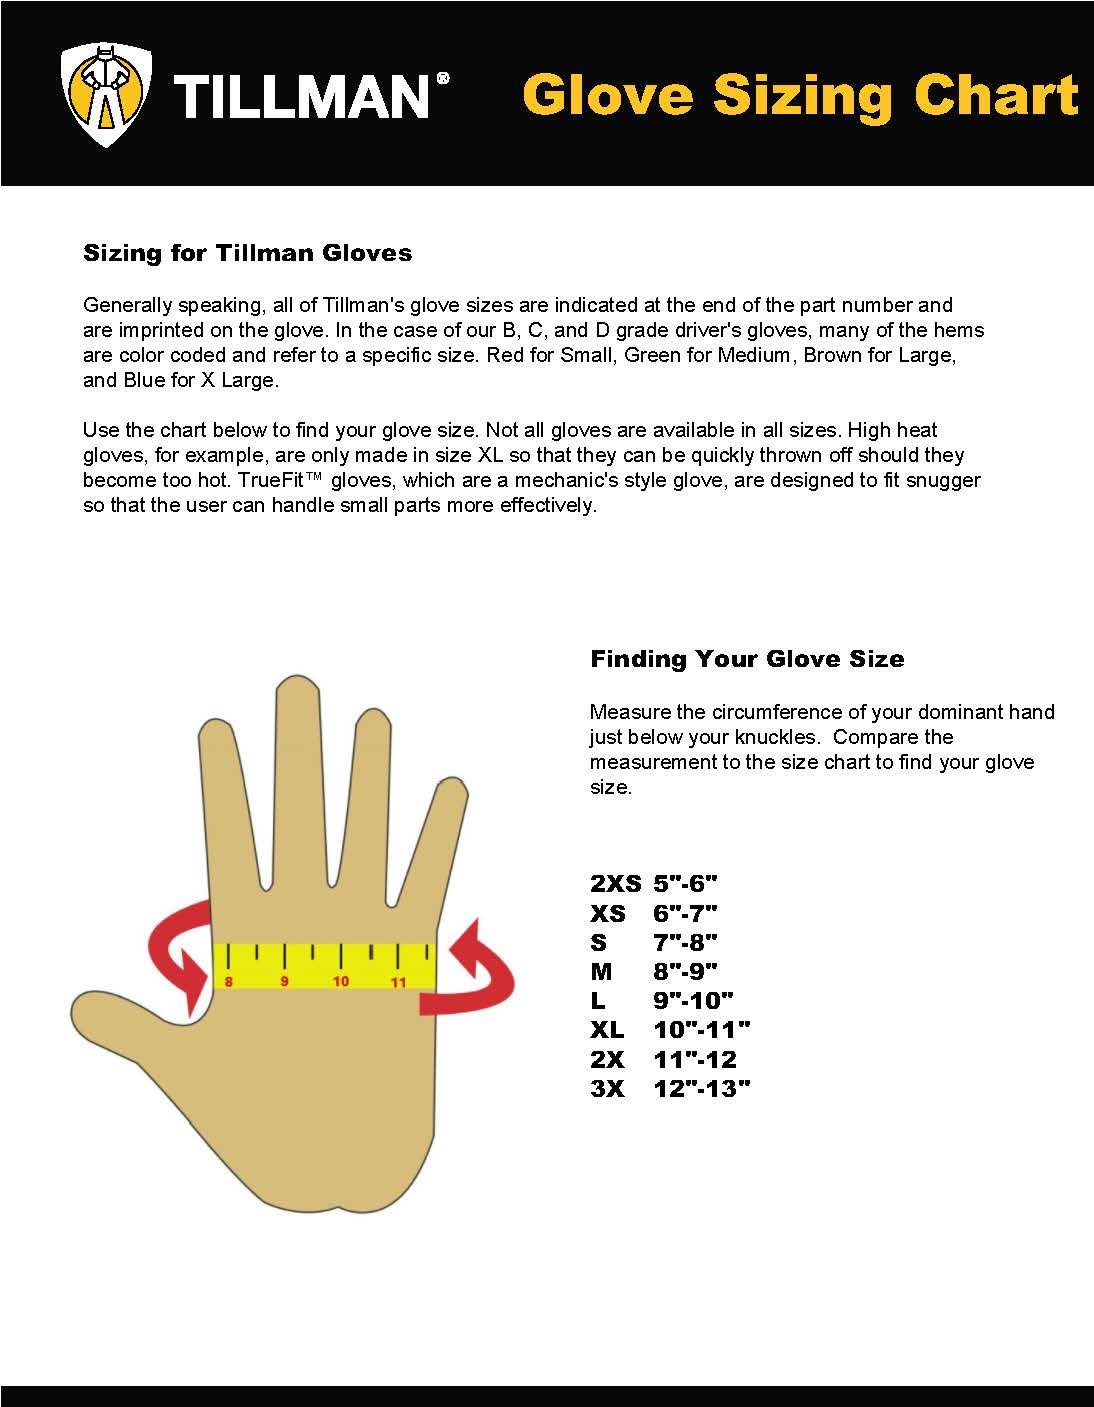 Tillman 1485 Truefit Insulated Gloves Sizing Chart from Columbia Safety